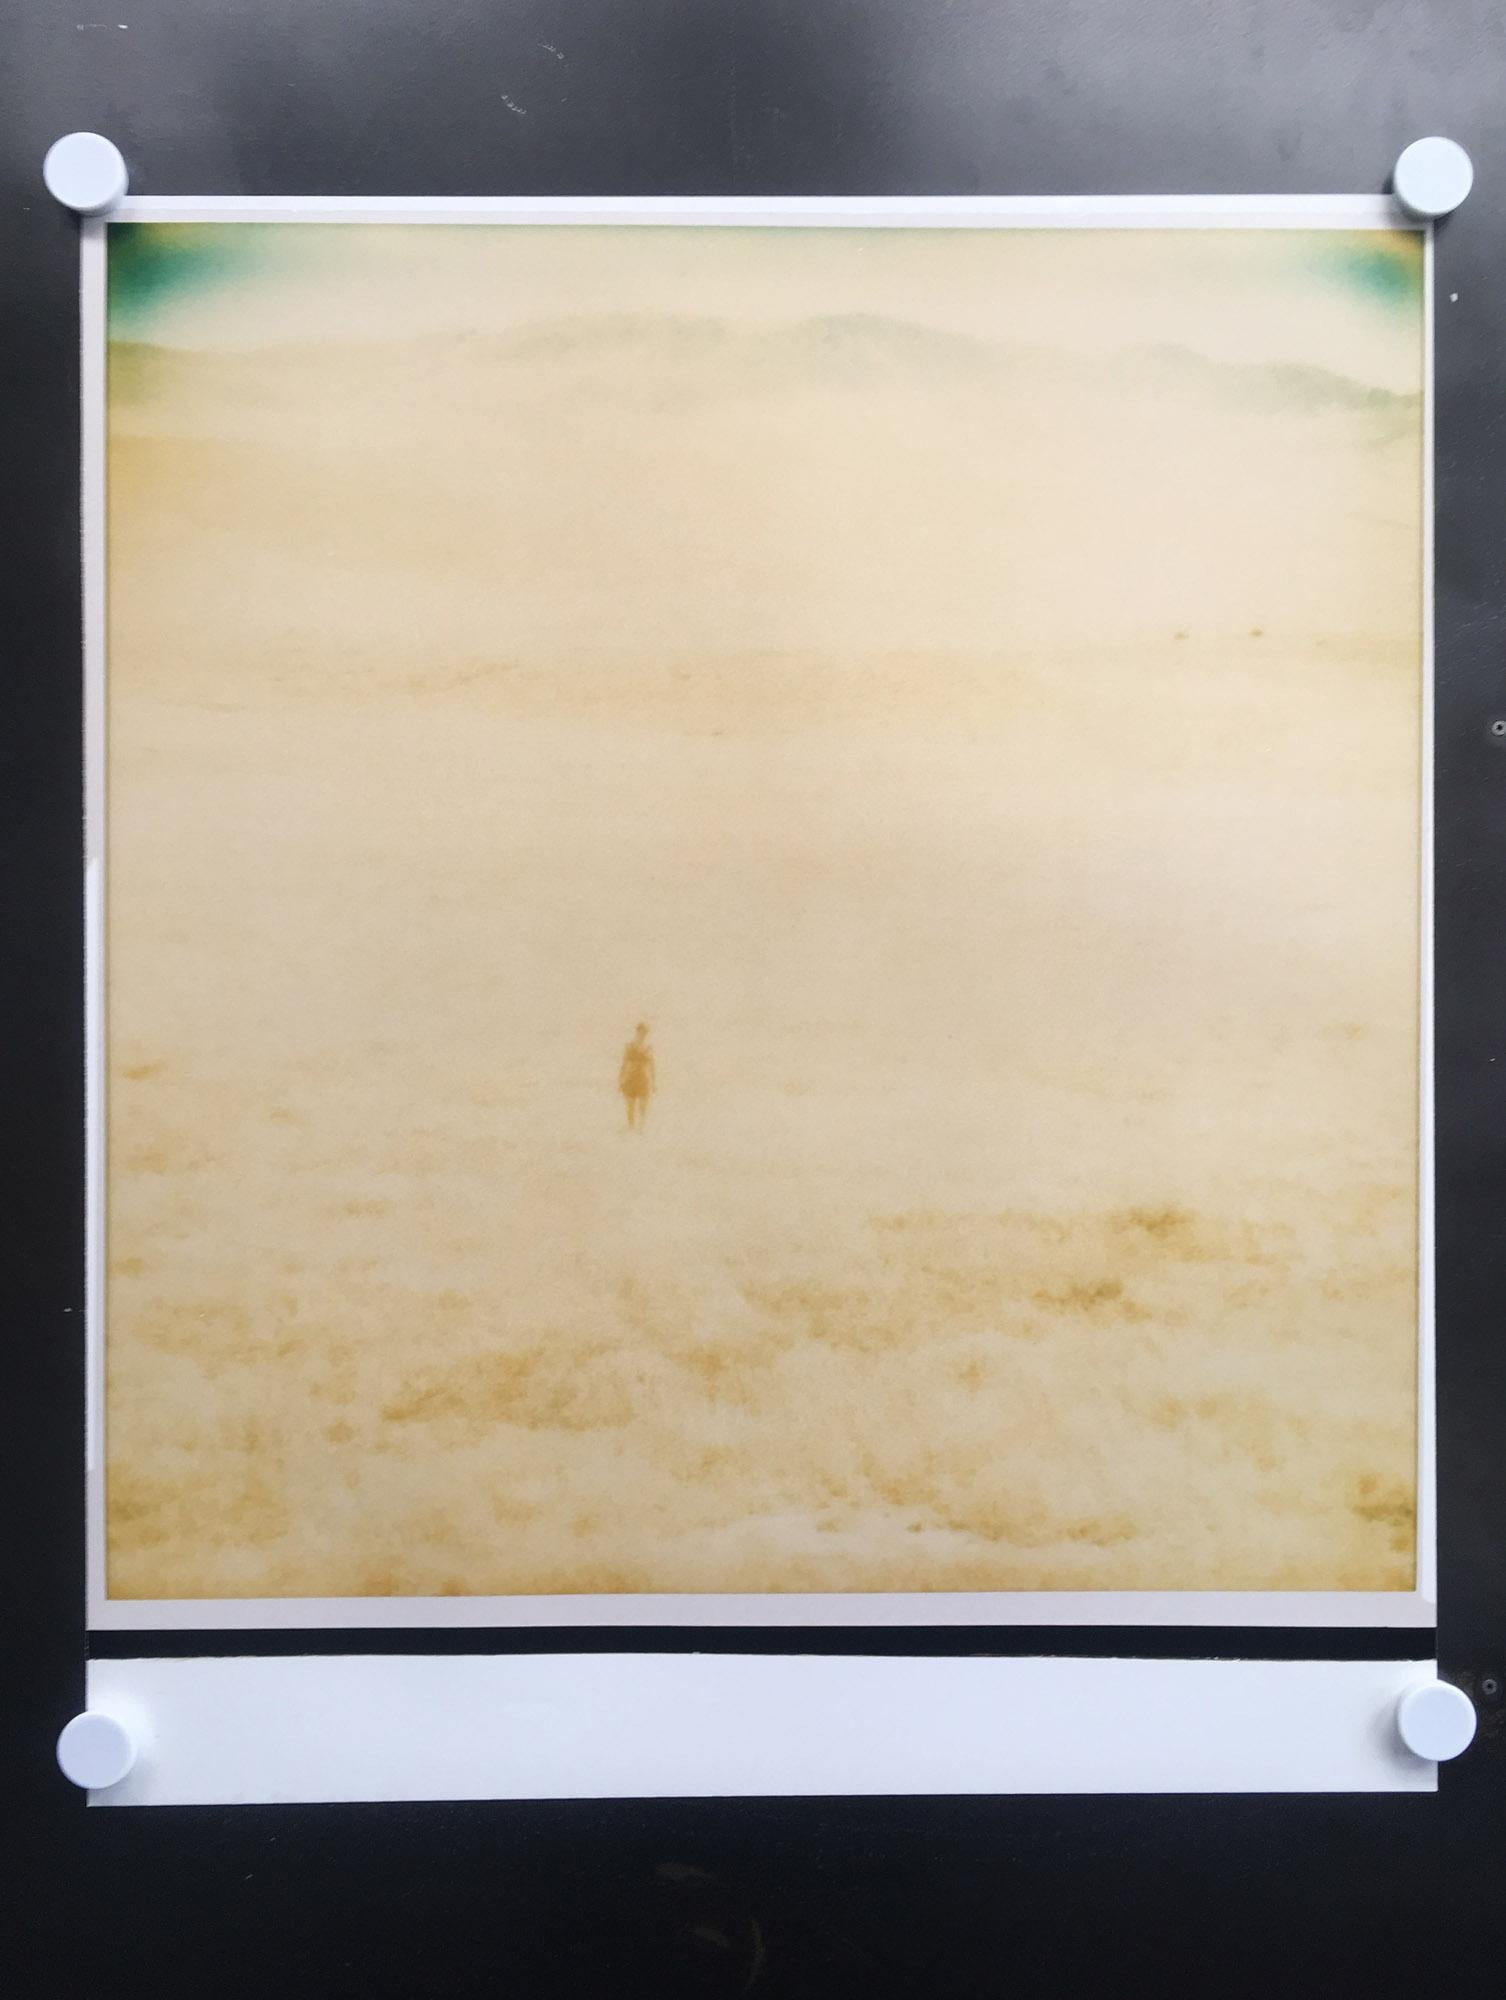 Untitled (Oilfields), 2004

60x60cm, 
Edition 4/10
Analog C-Print, hand-printed by the artist, based on the original Polaroid.
Certificate and Signature label. 
Artist Inventory No. 1202.04.
Not mounted. 

OILFIELDS, 2004

Oilfields connotes both